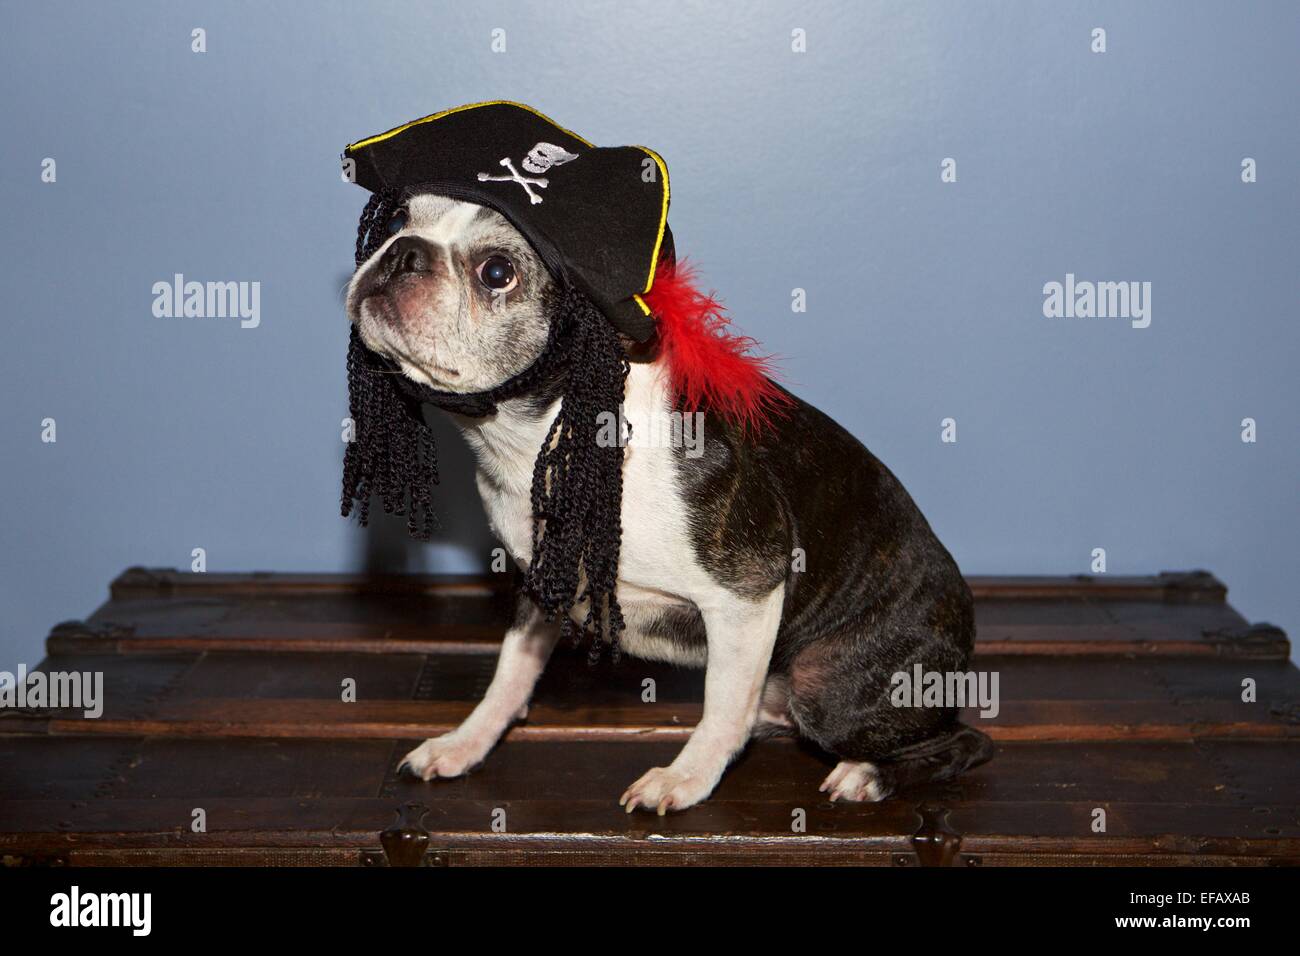 Boston Terrier dog sitting on a chest wearing a pirate hat Stock Photo